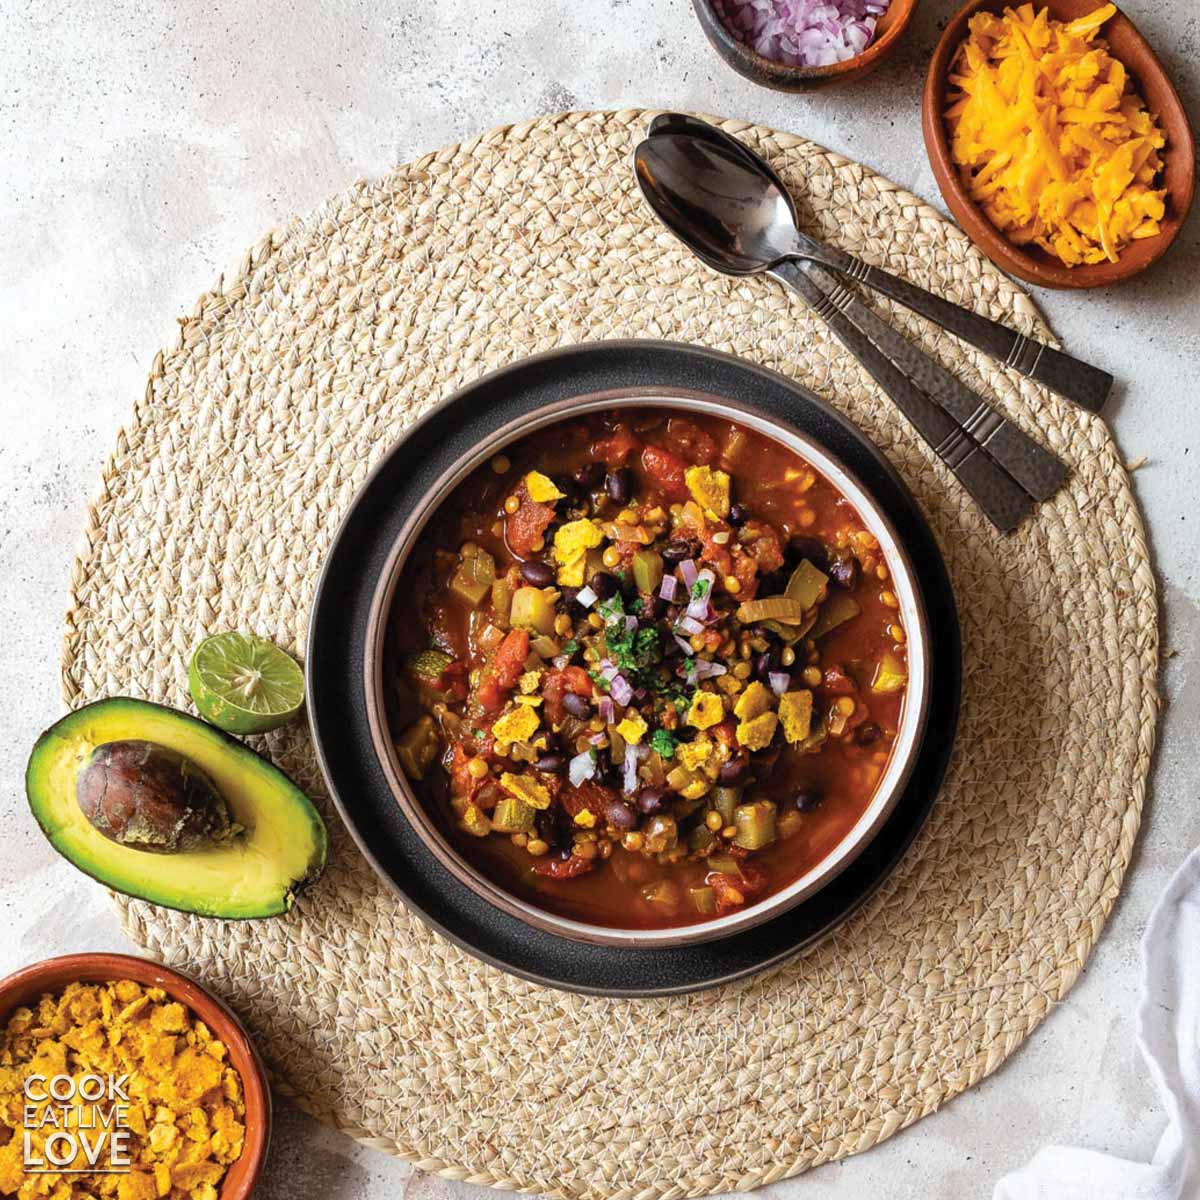 Bowl of bean lentil chili with tomato and avocado and tortilla chips to top it.